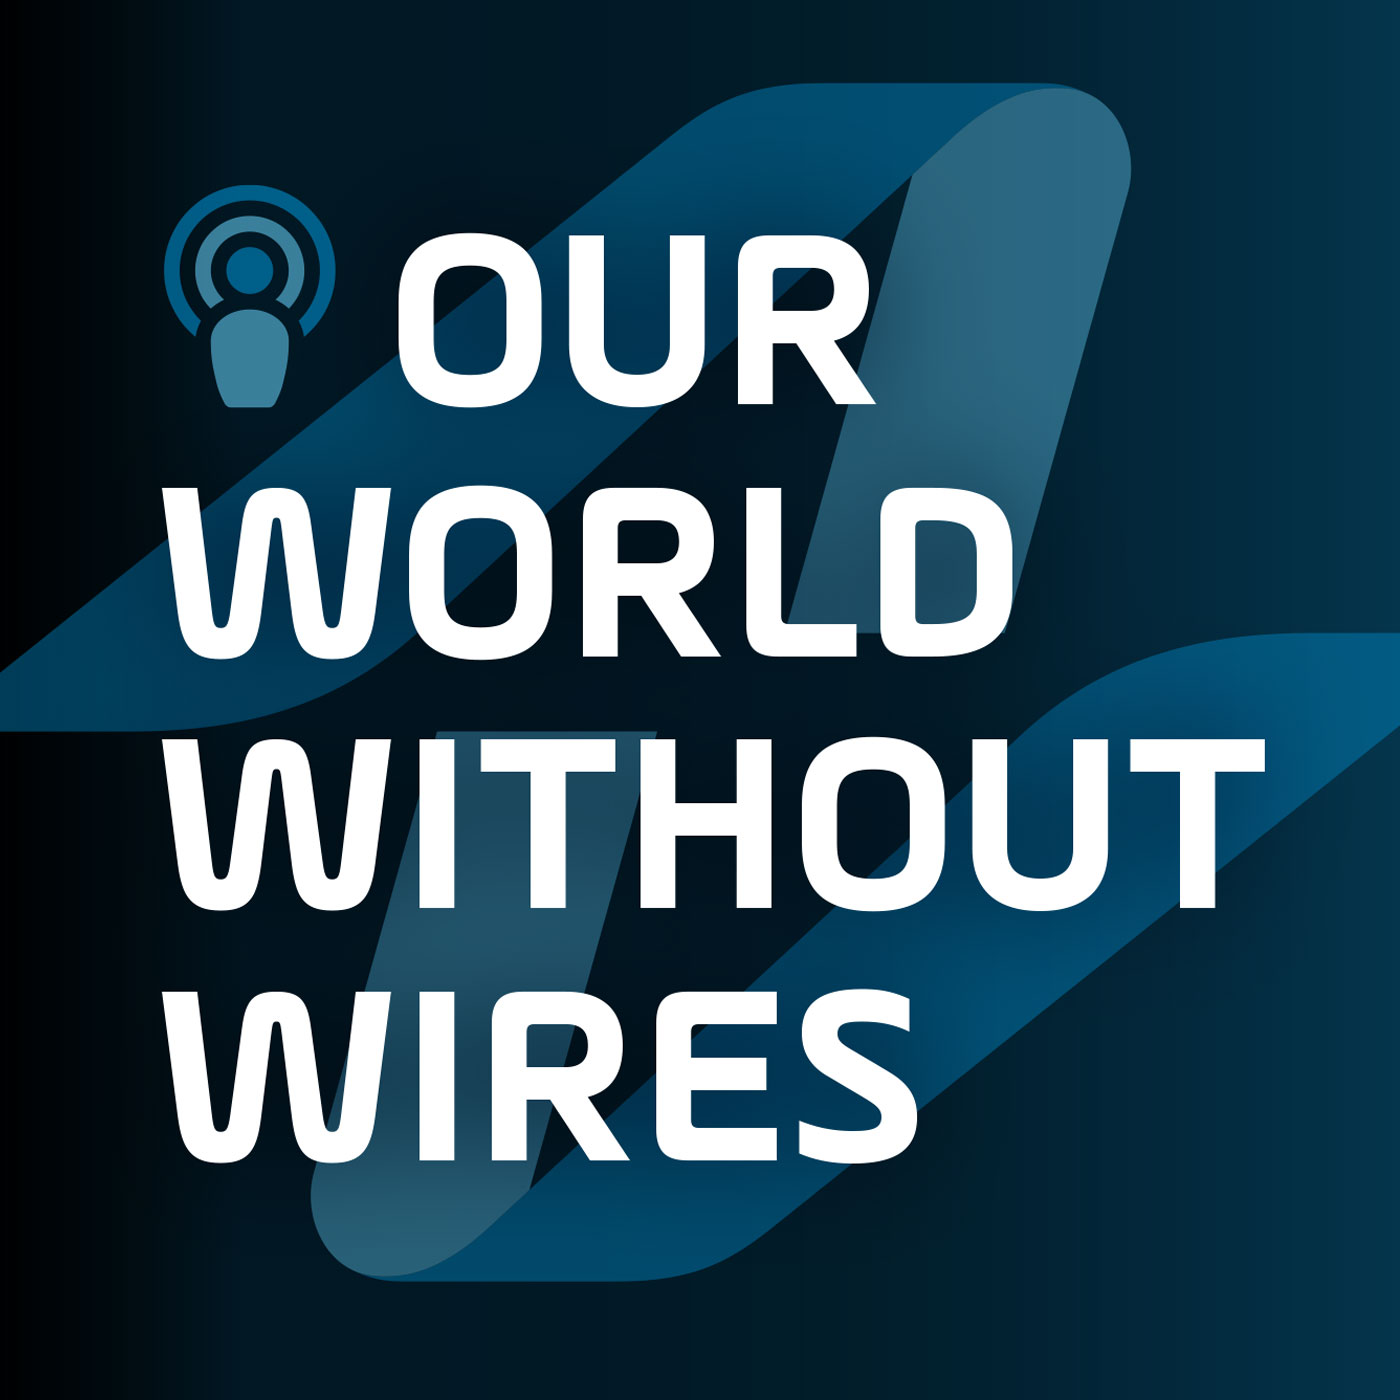 Our World Without Wires